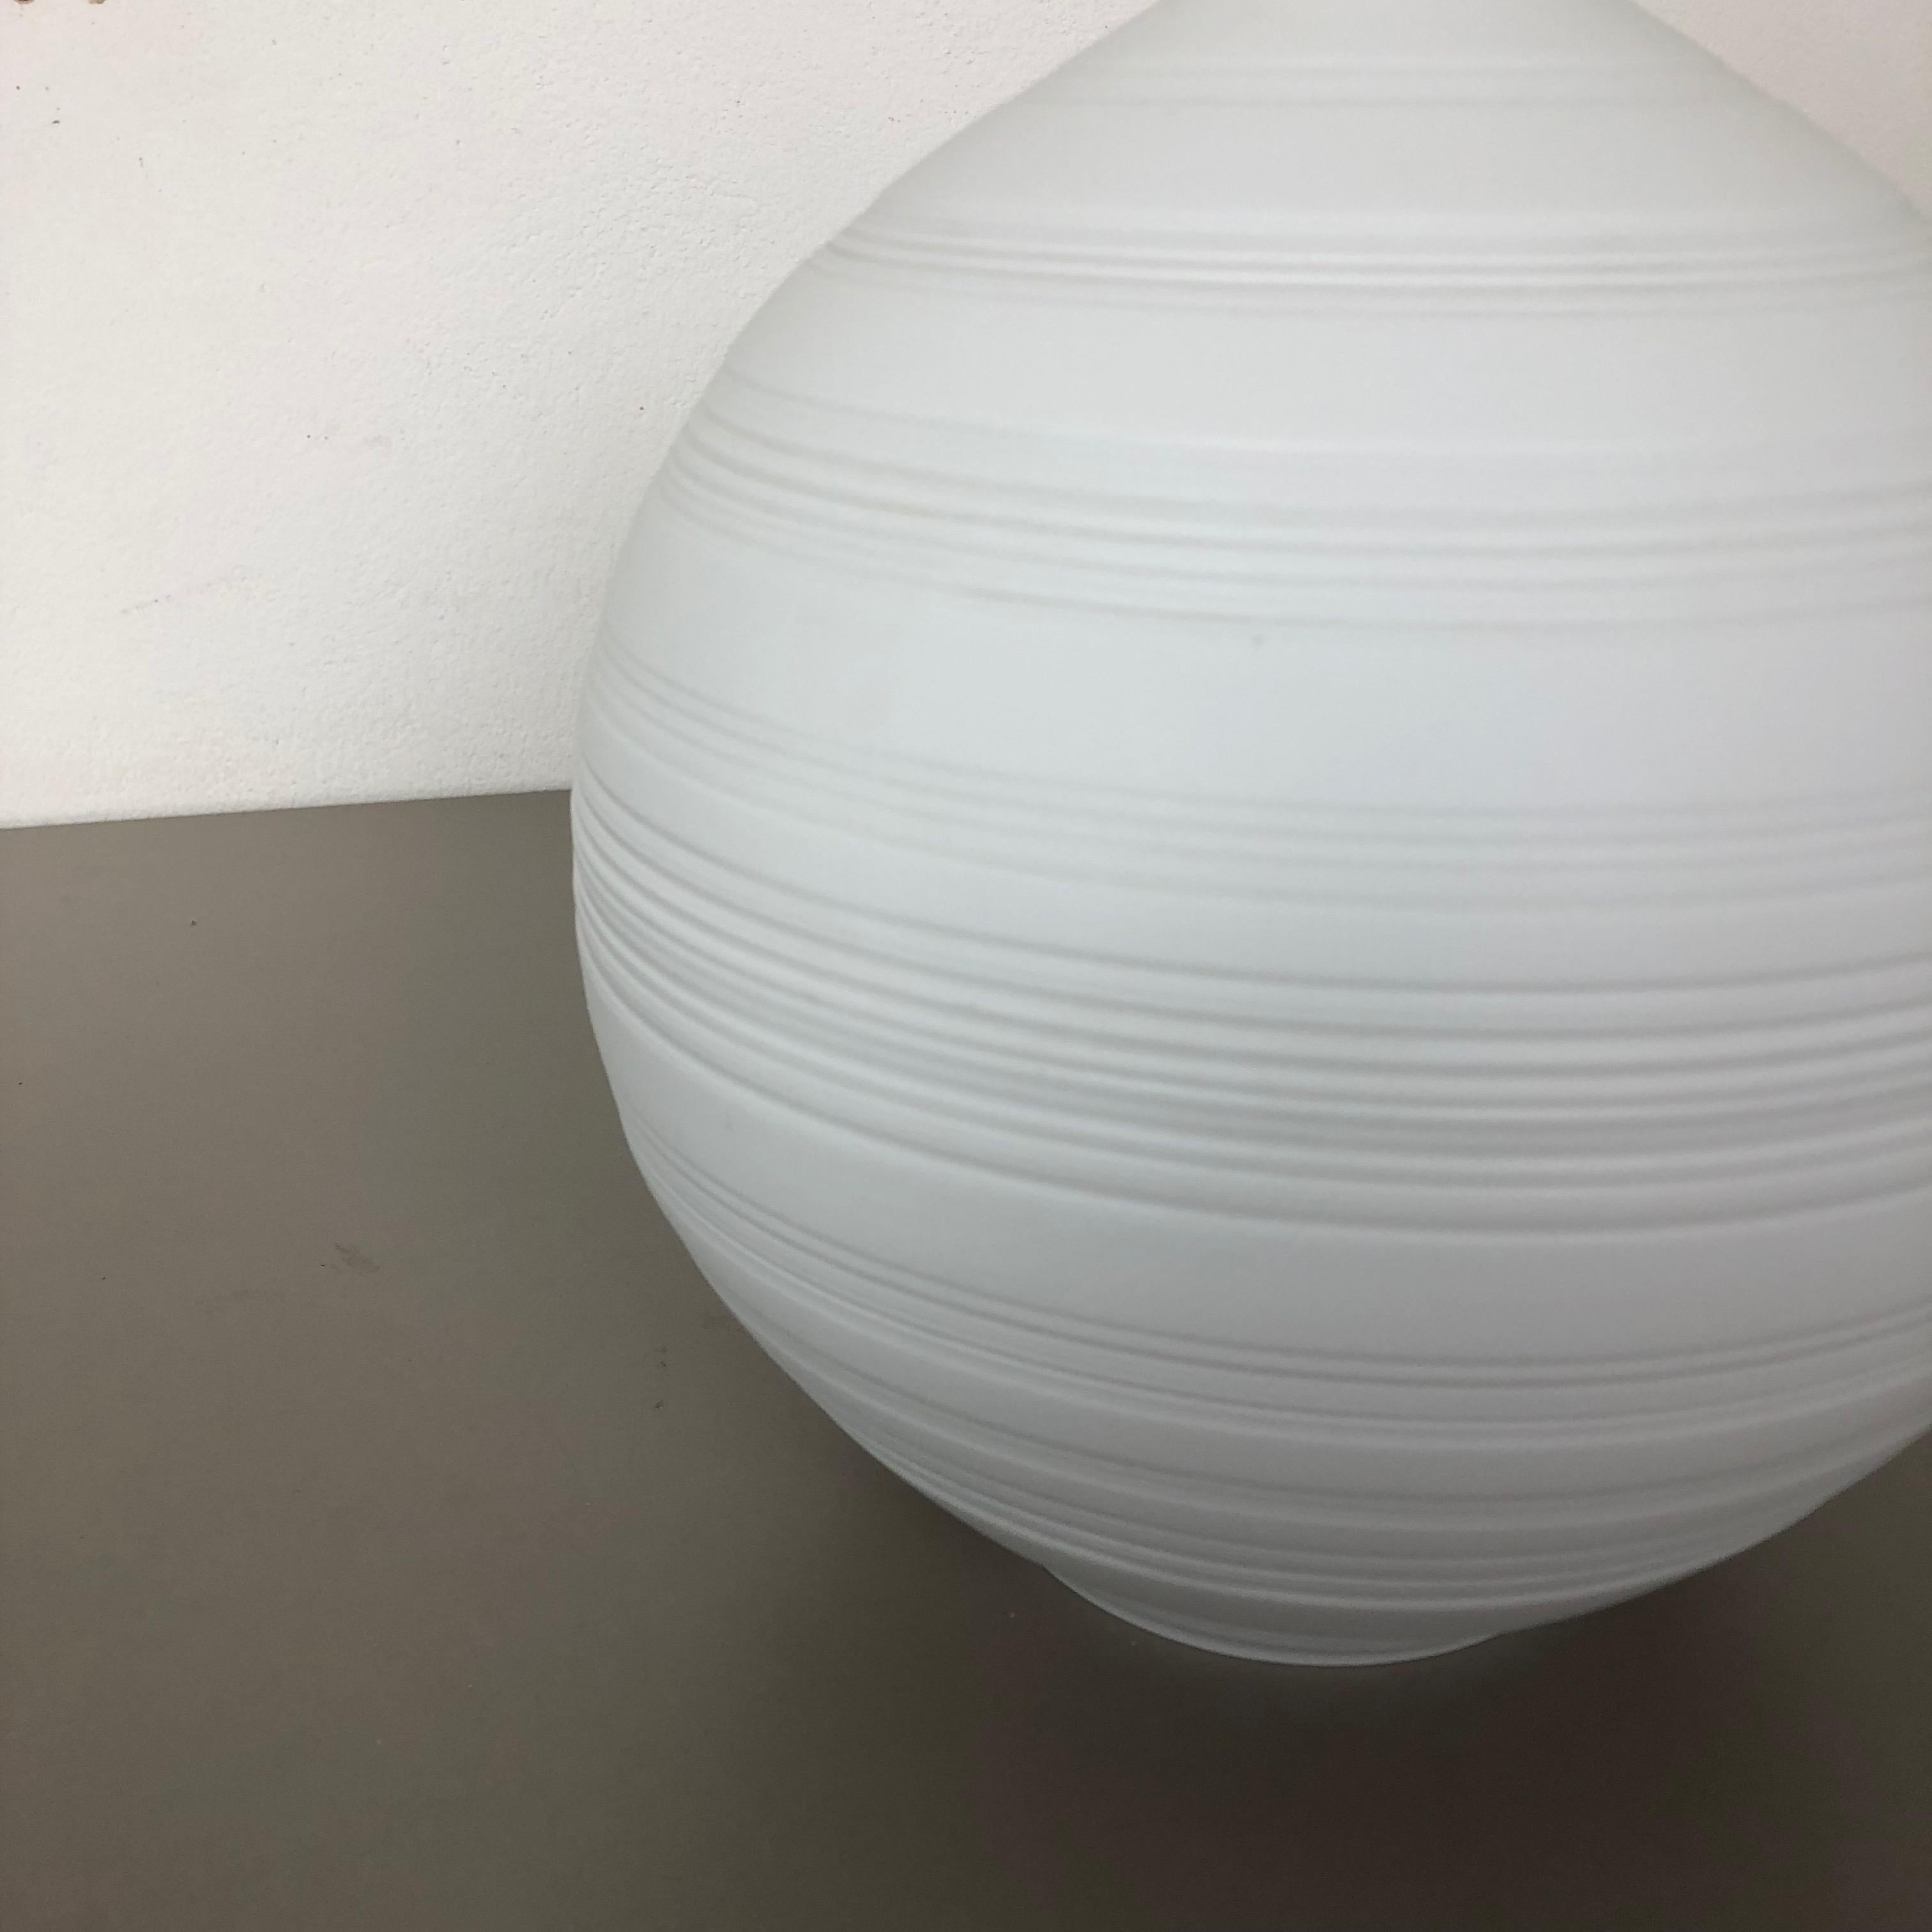 OP Art Vase Biscuit Porcelain by Hans Achtziger for Hutschenreuther, 1970s In Good Condition For Sale In Kirchlengern, DE